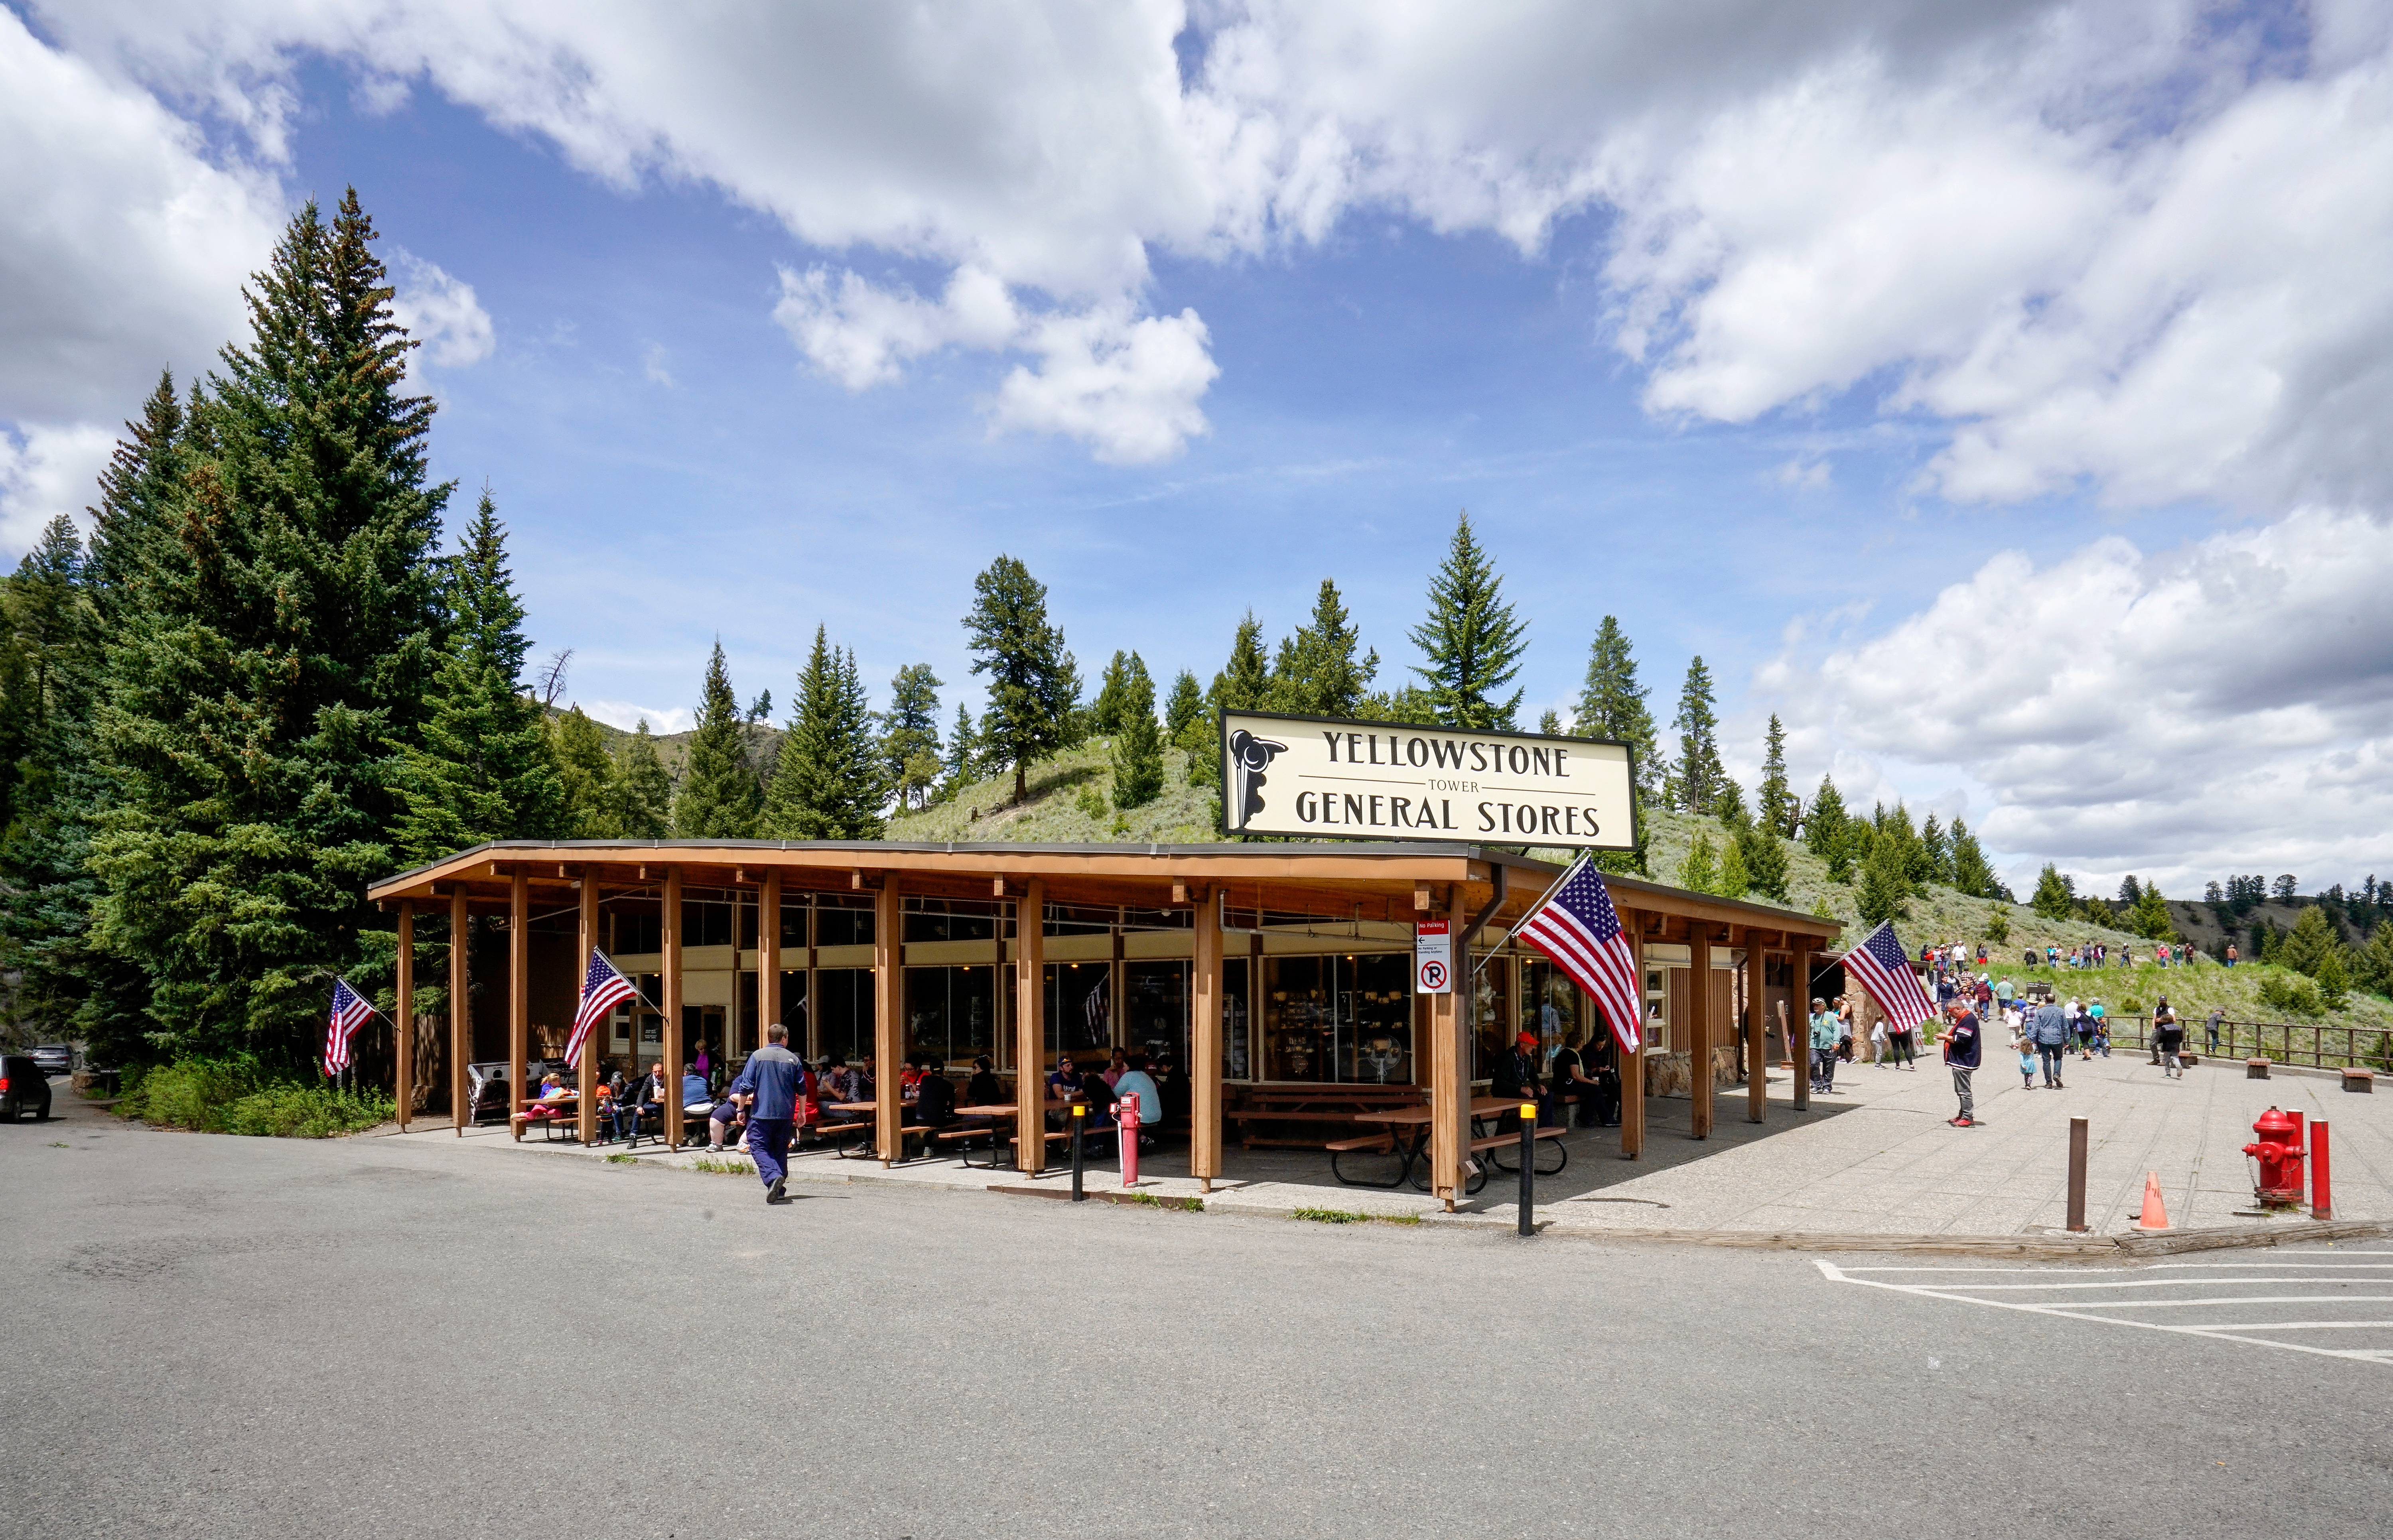 Tower General Store exterior in Yellowstone National Park